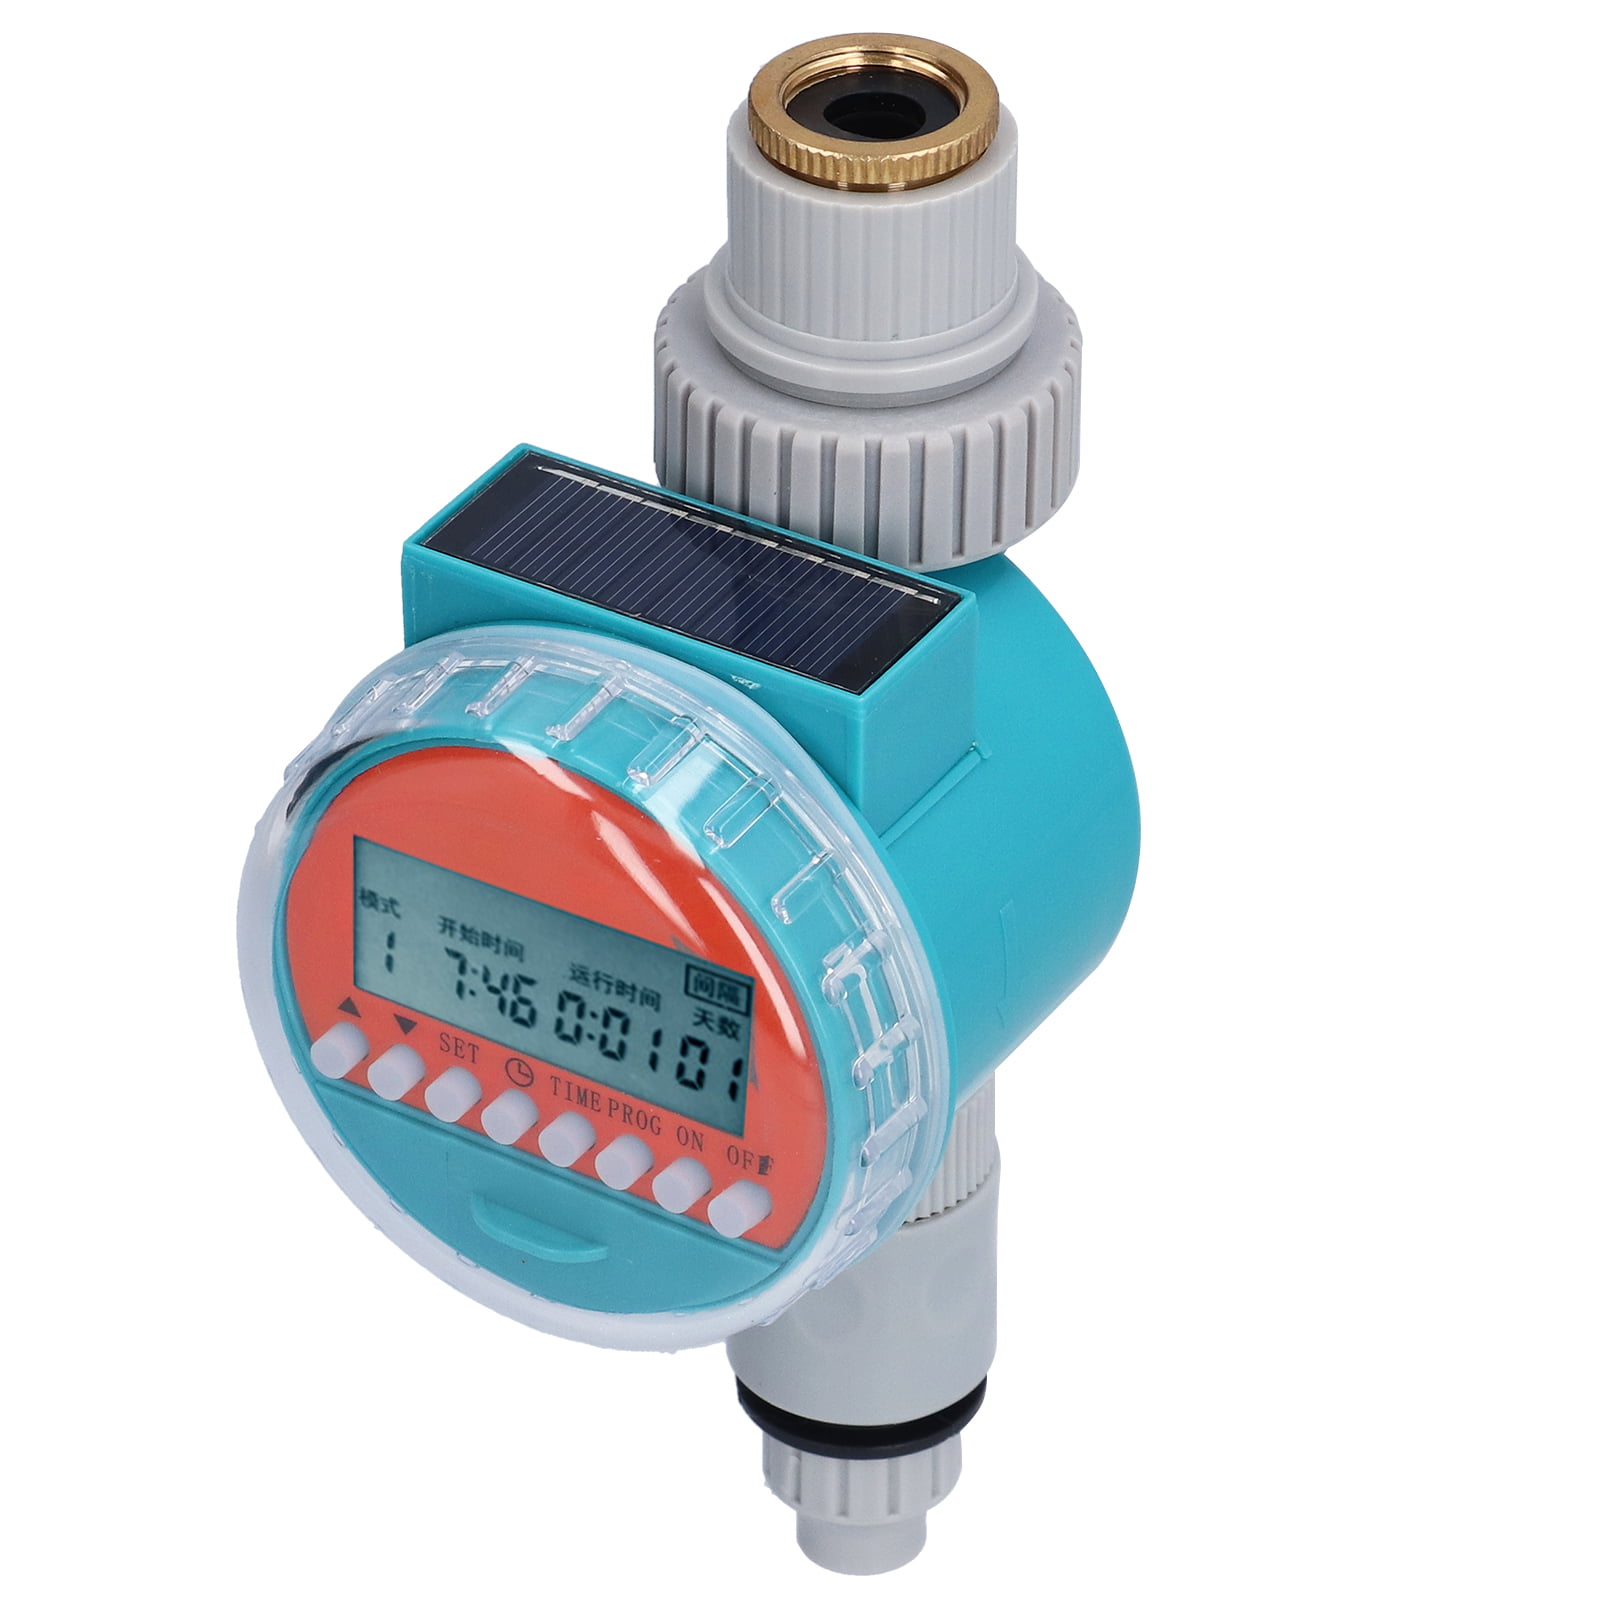 P3 Water Meter P0550 International Usage Direct for sale online 